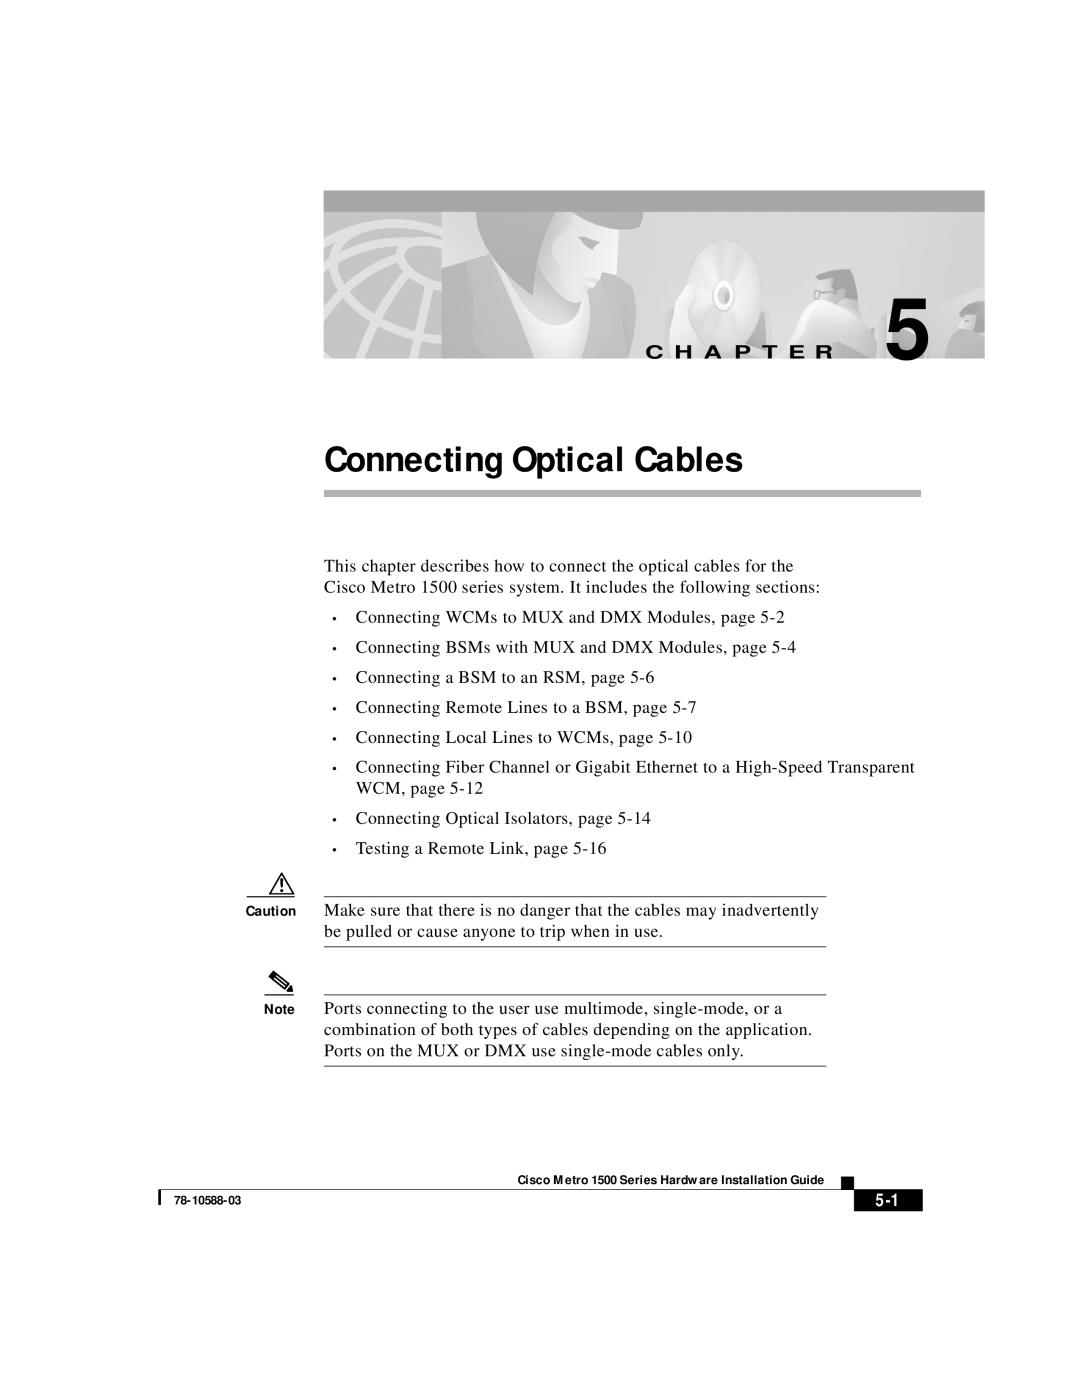 Cisco Systems 1500 manual Connecting Optical Cables, C H A P T E R 